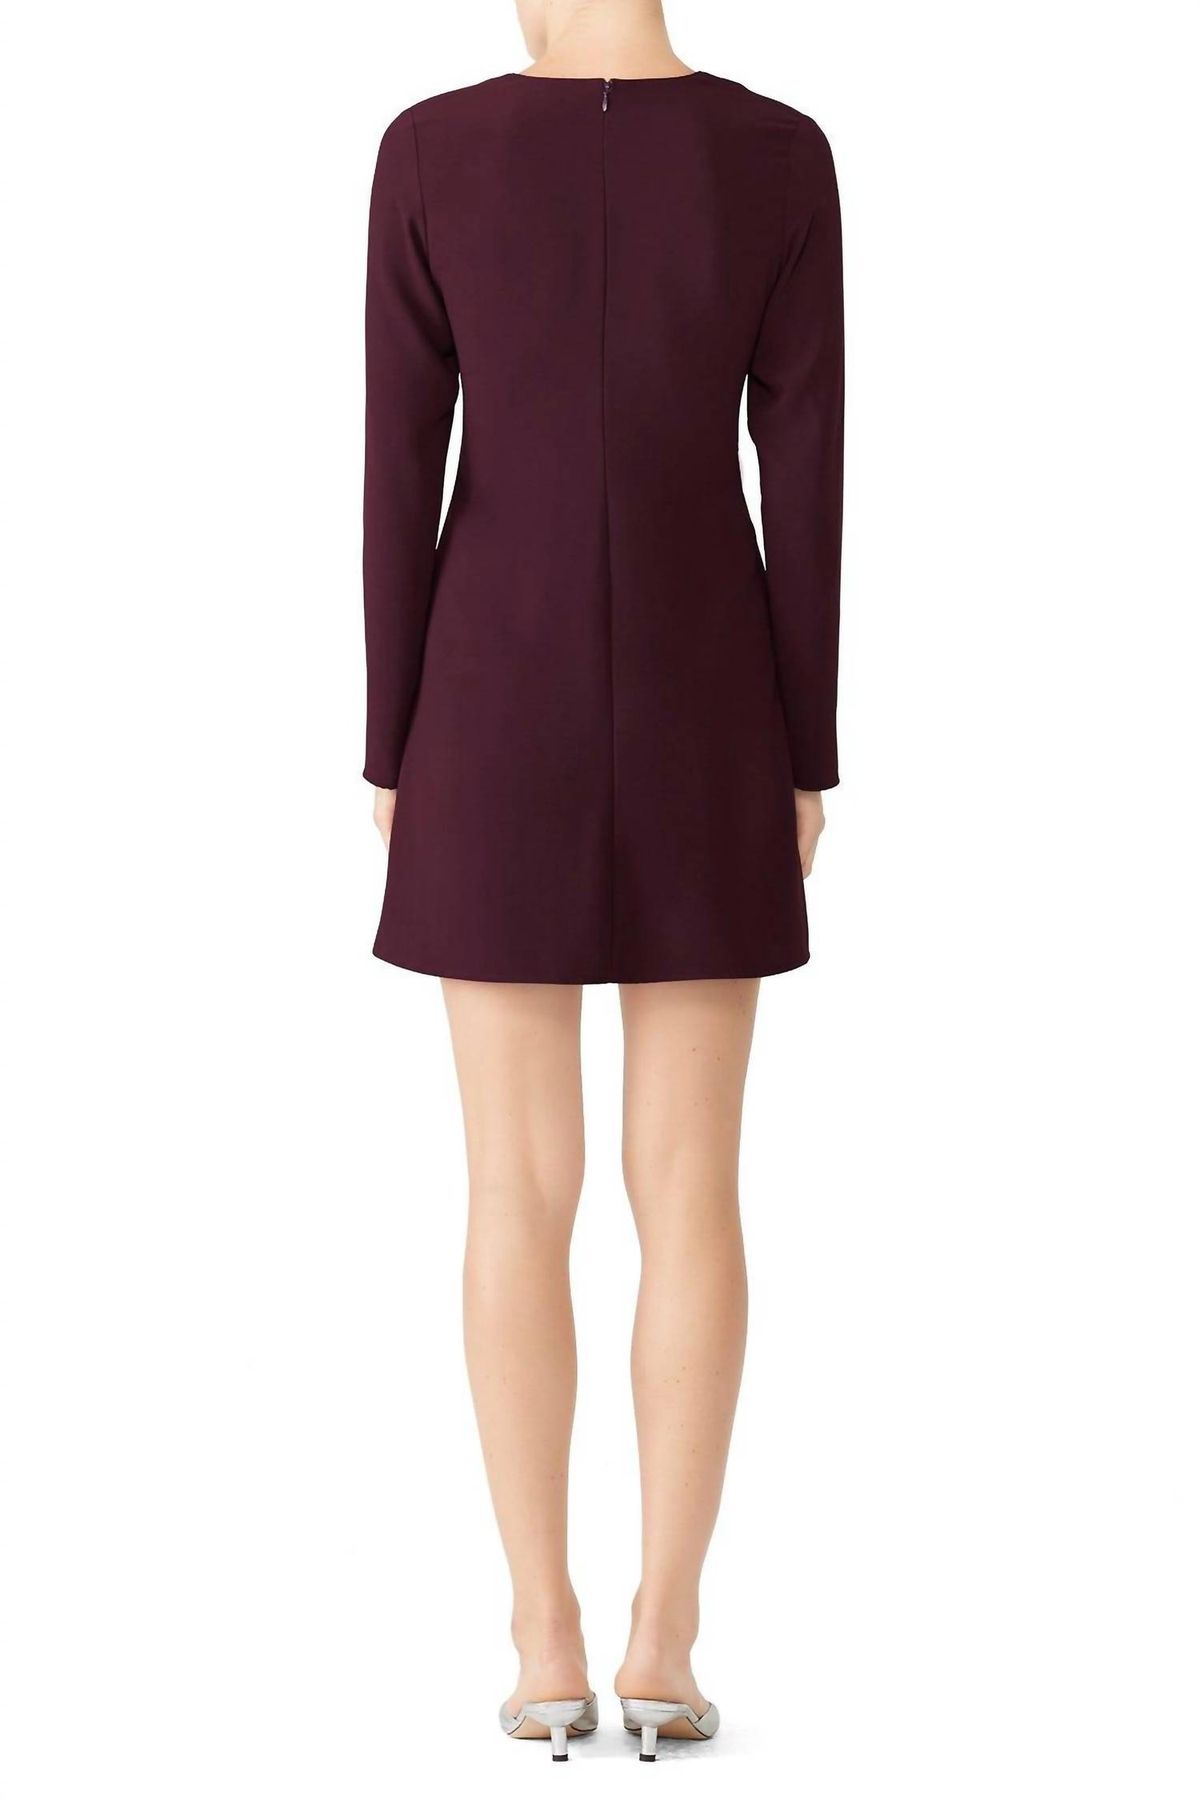 Style 1-2446412538-2901-1 Amanda Uprichard Size M Long Sleeve Purple Cocktail Dress on Queenly